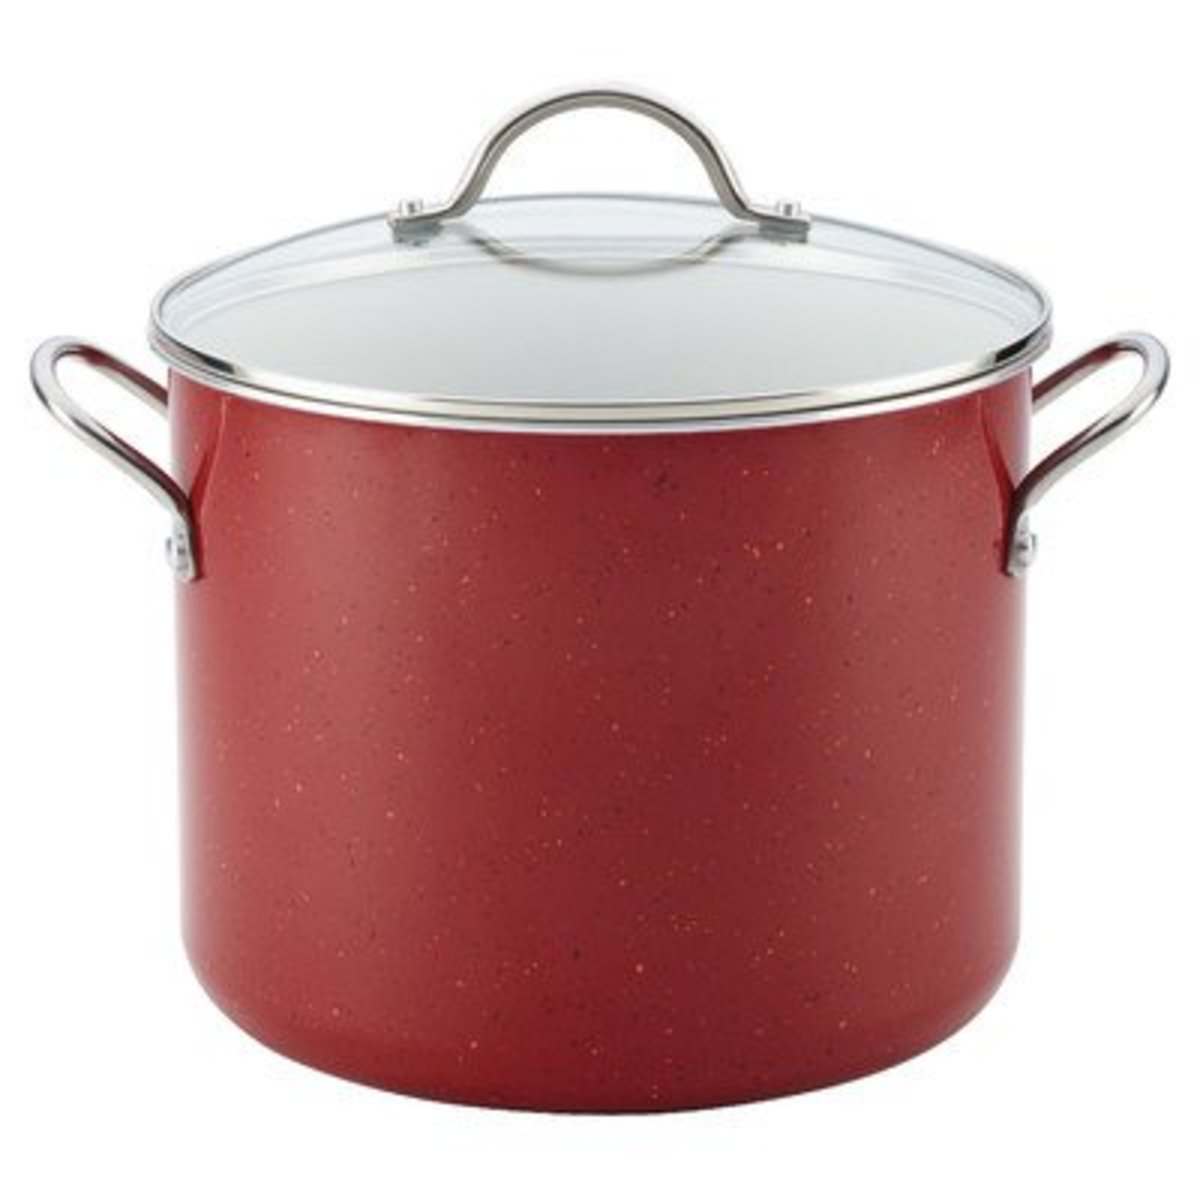 Stockpot is the right size for making the noodles, dumplings, soups, and stews that are the staple of  famous Hungarian food. A large pot like this is essential for many of the dishes.